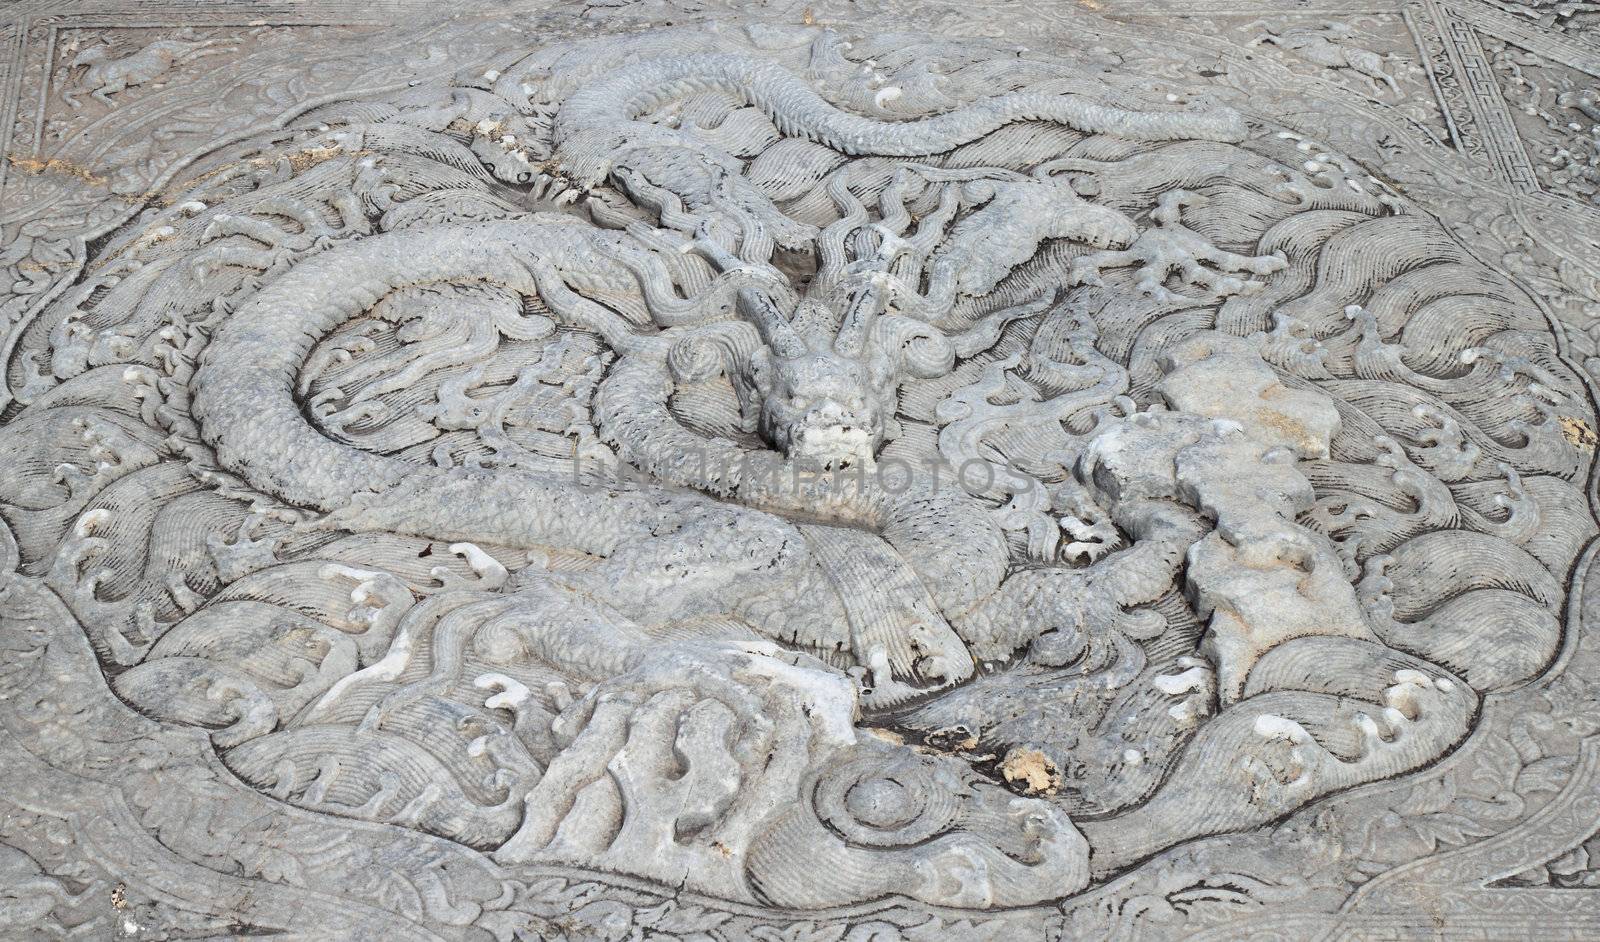 Dragon culptures on the stone  by geargodz